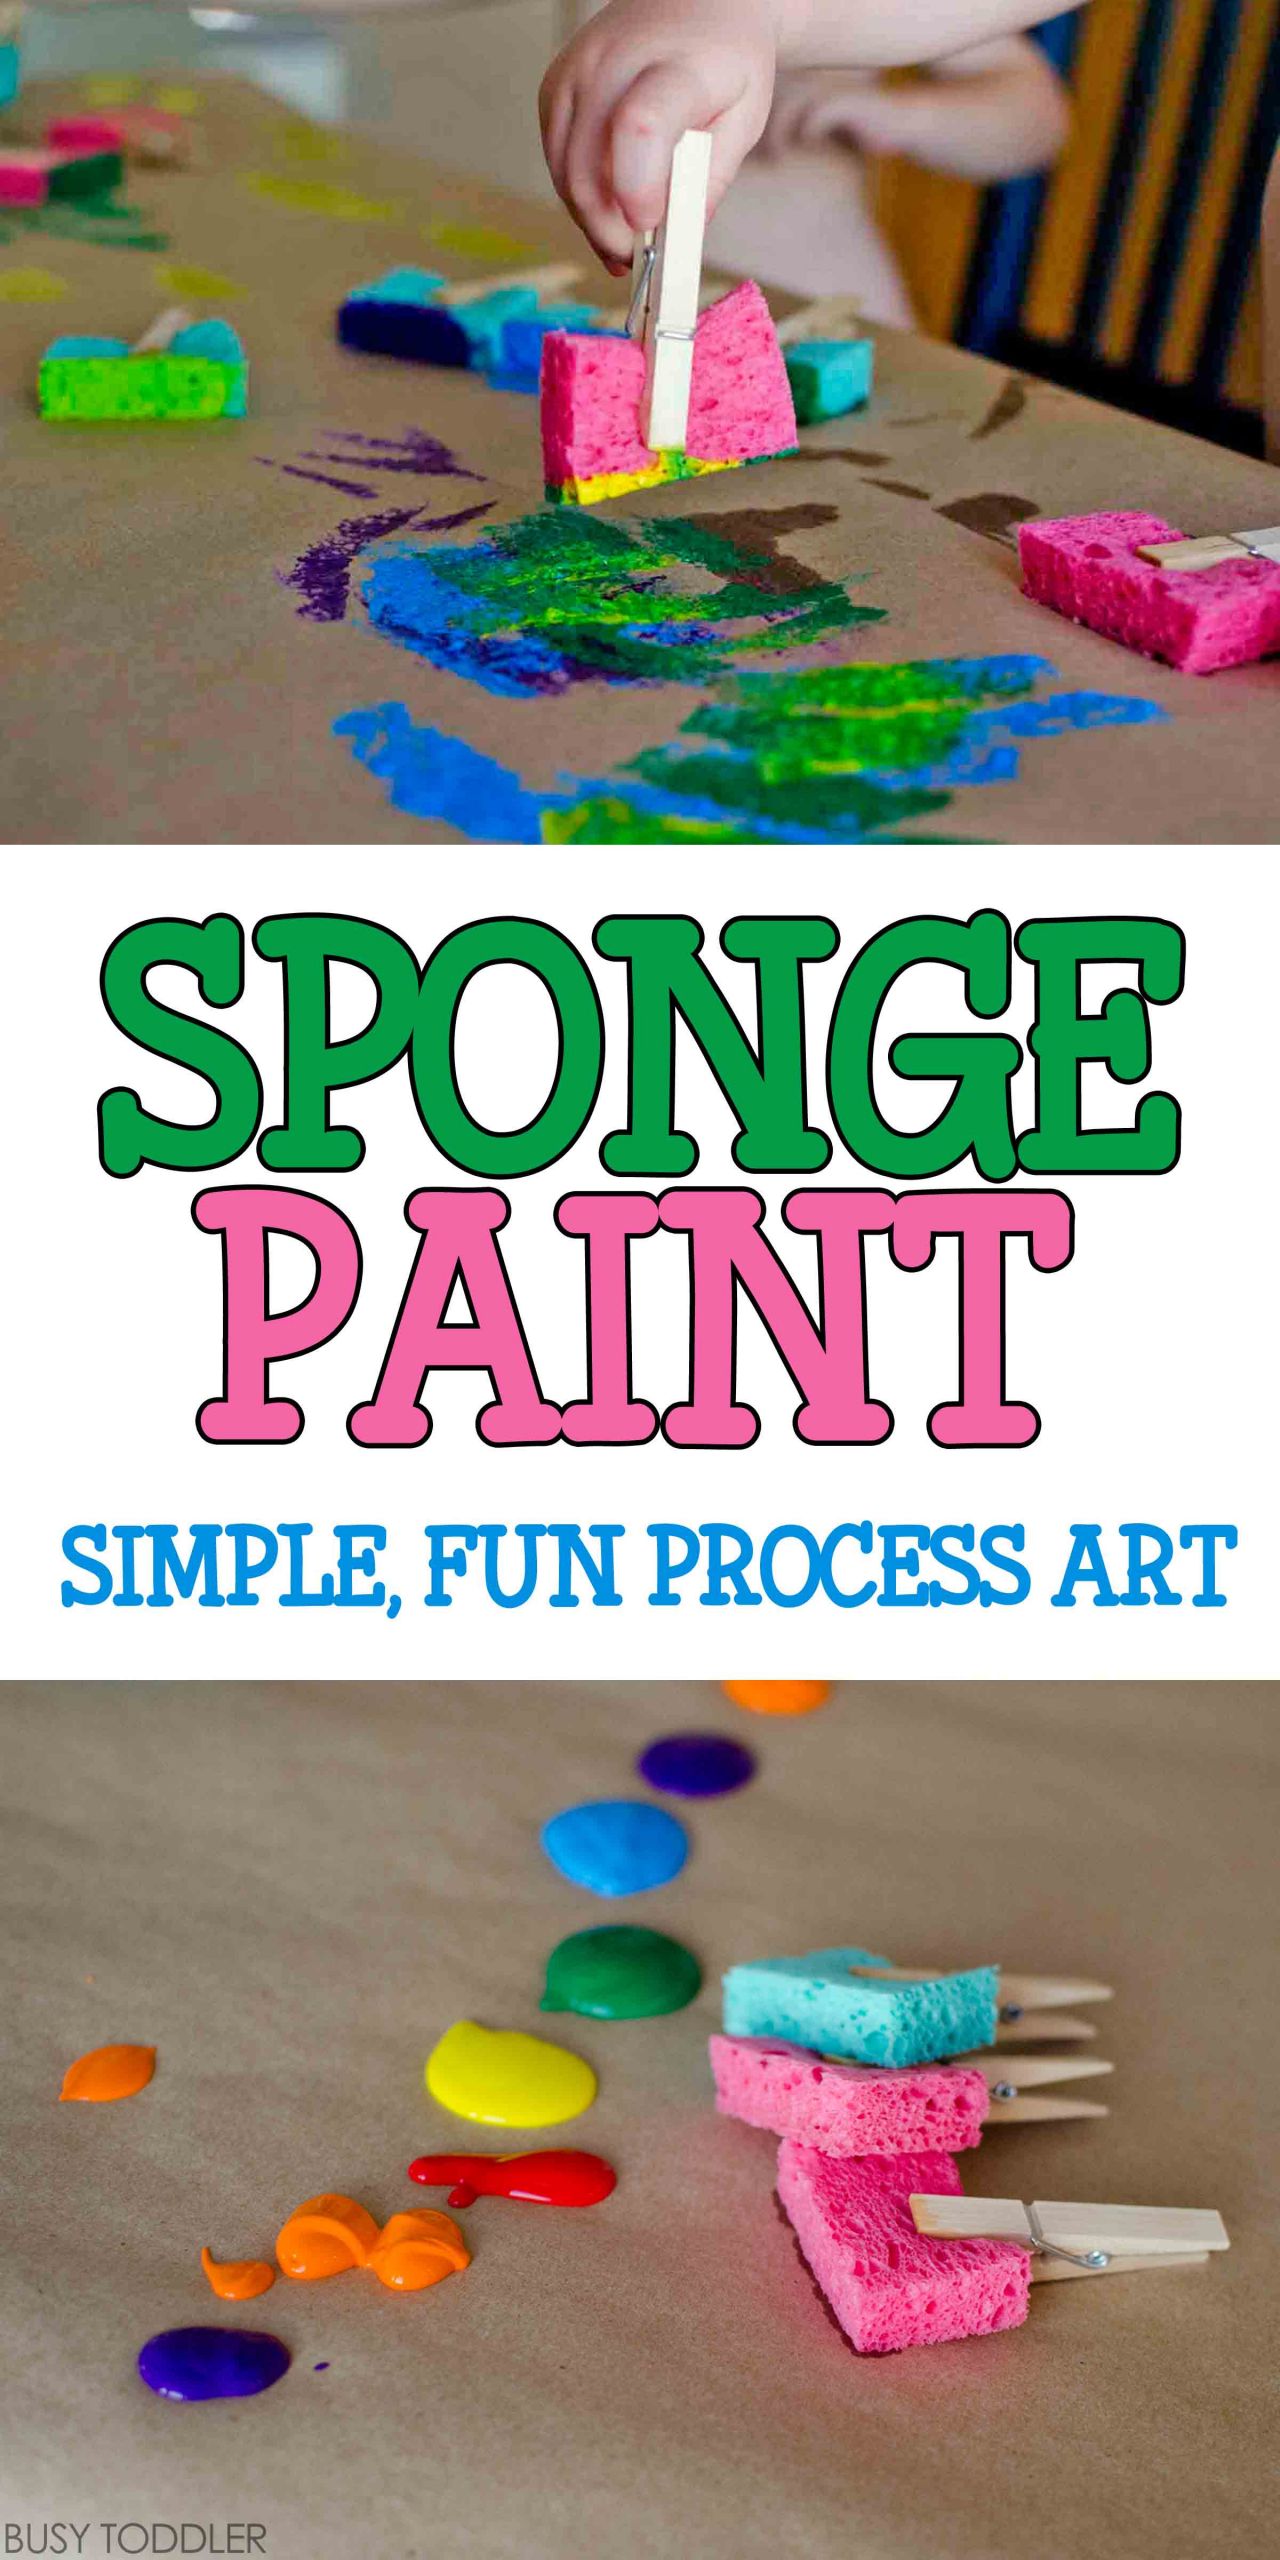 Simple Art Projects For Preschool
 Sponge Painting Process Art Busy Toddler